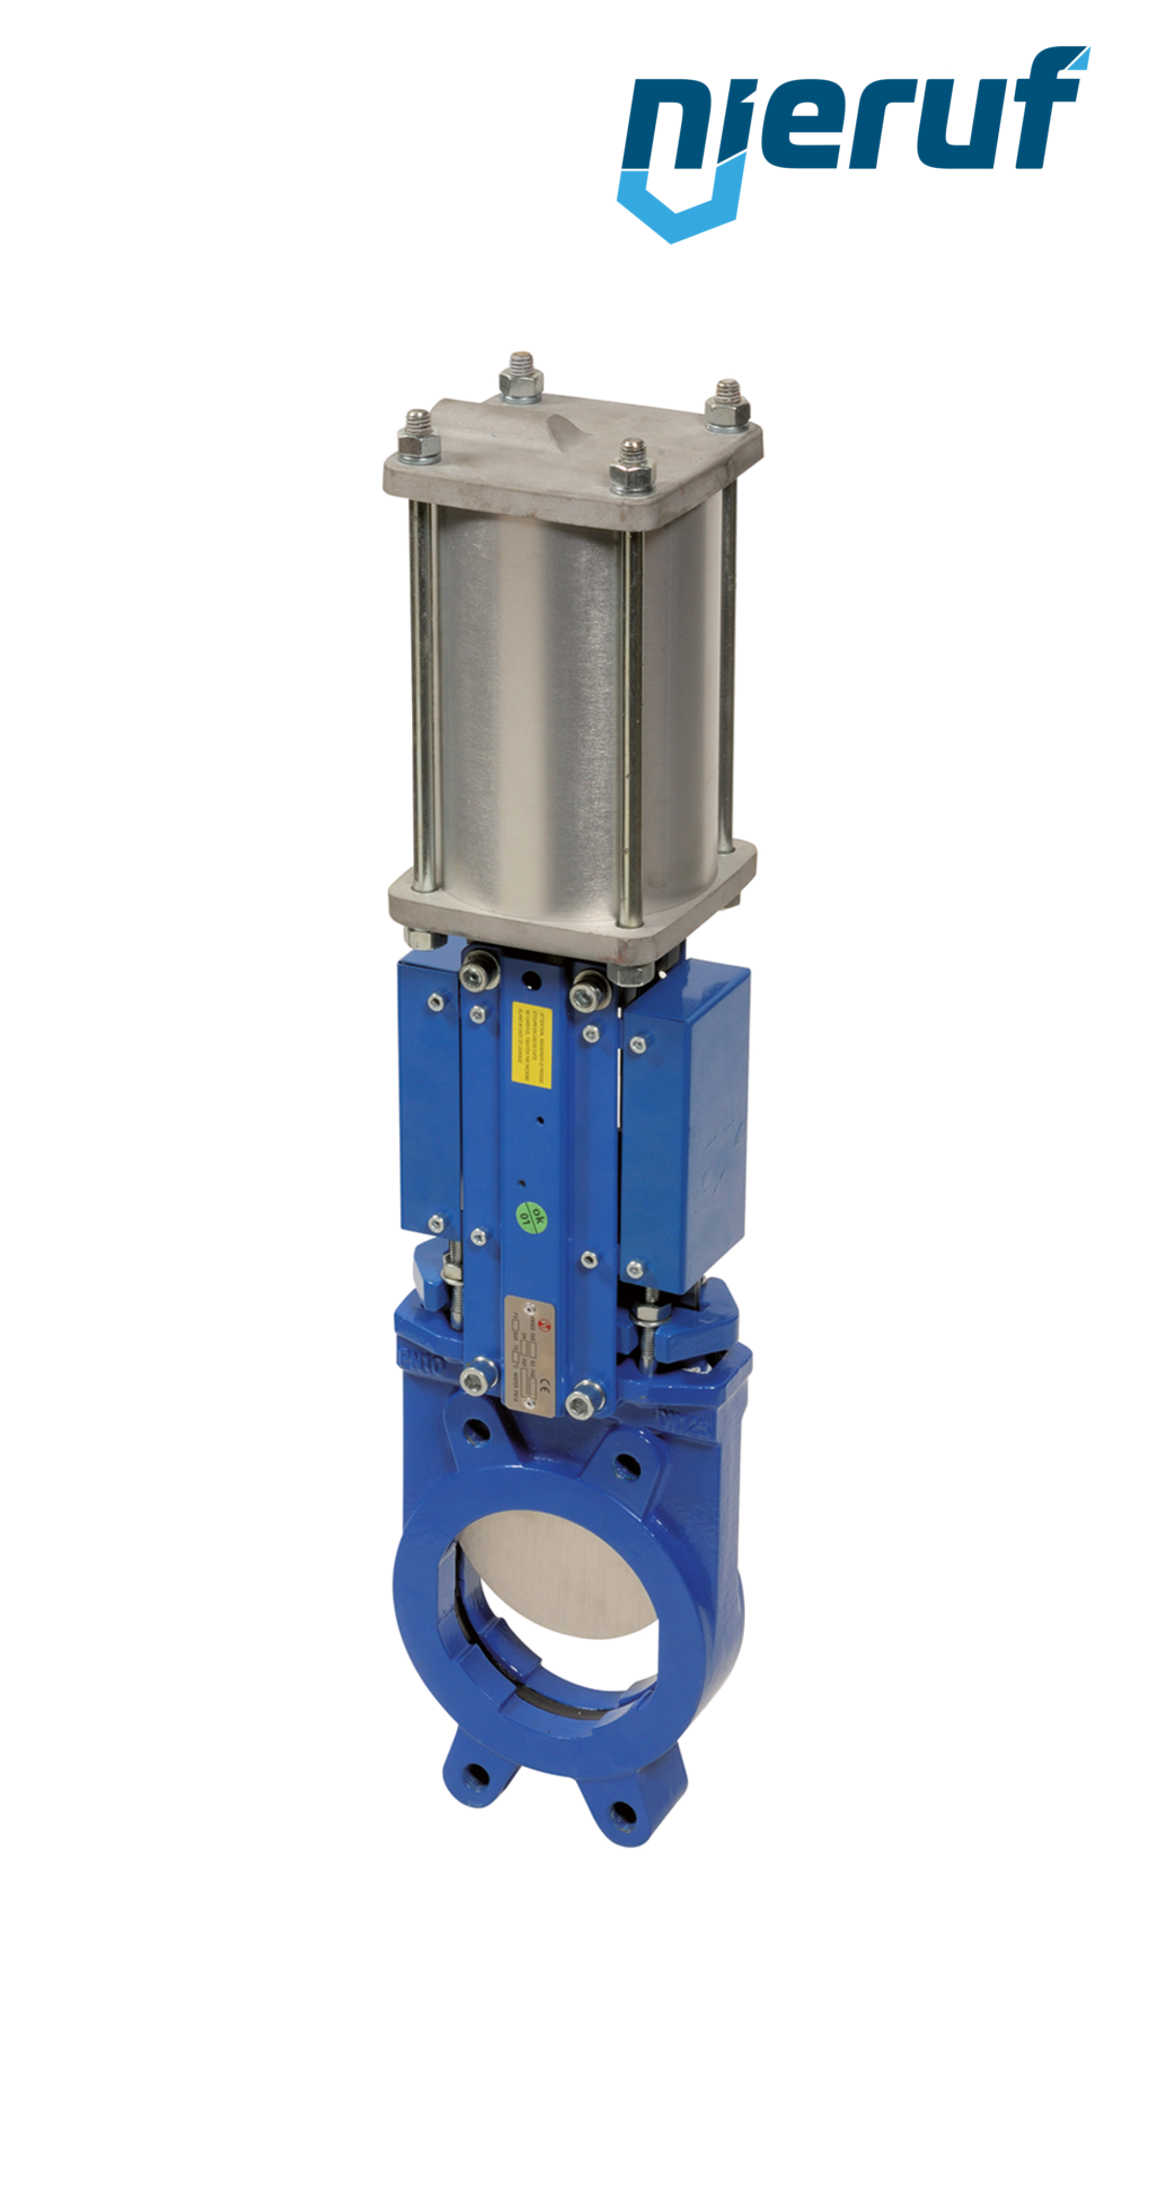 Knife gate valve DN 50 SR01 NBR pneumatic actuation double acting